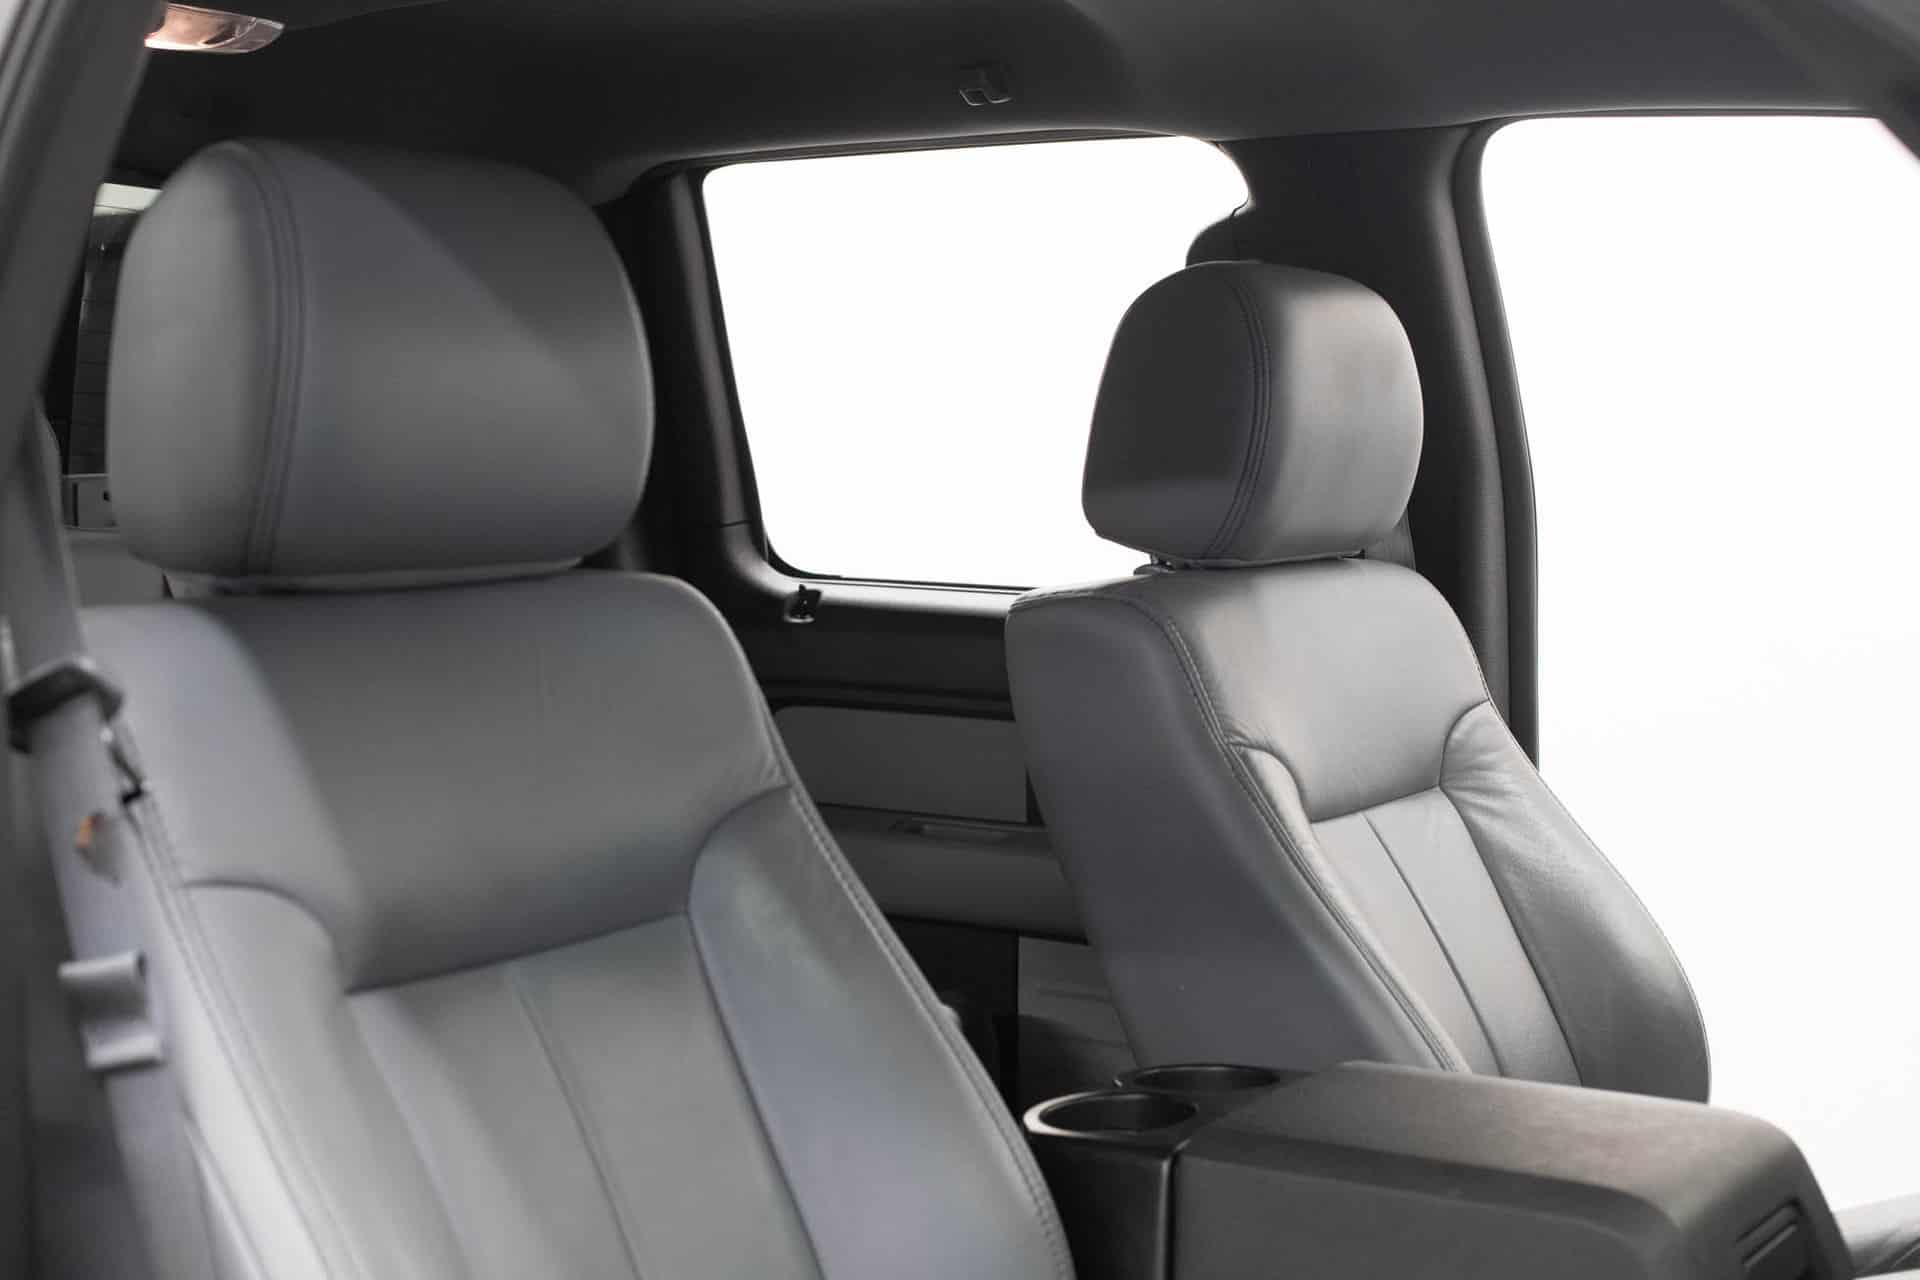 What Are the Best Seat Covers for Ford F150